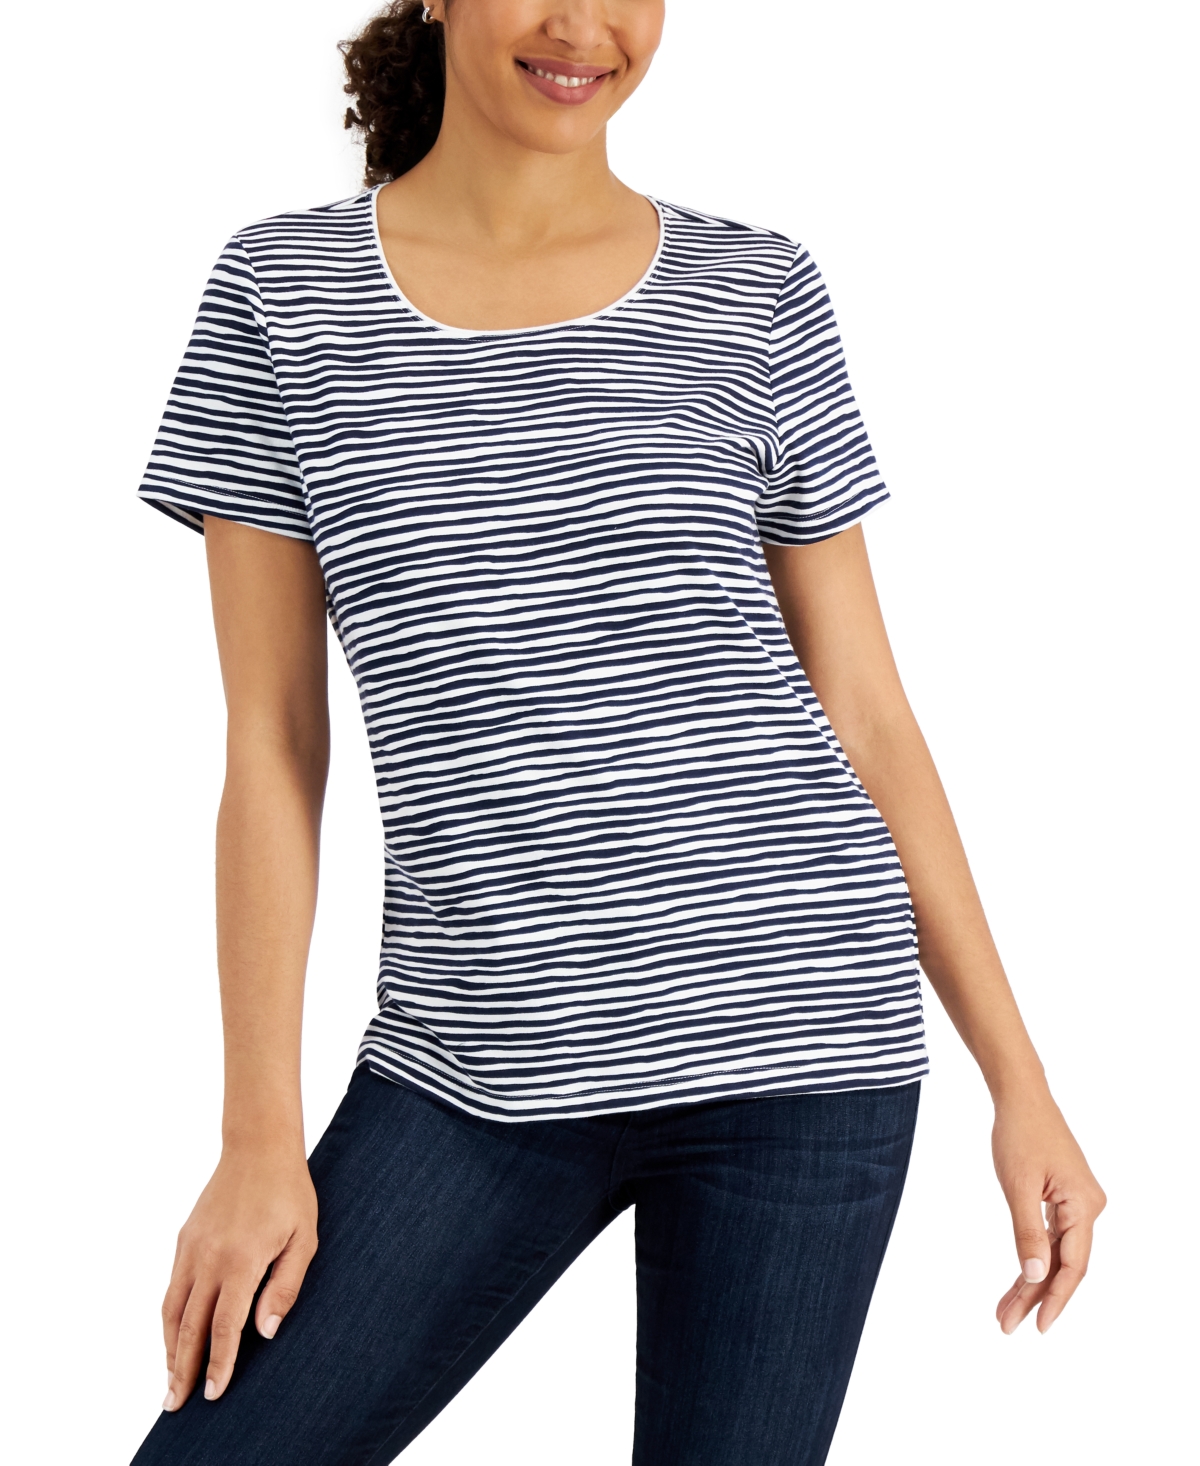 Striped Scoop-Neck Top, Created for Macy's - Intrepid Blue